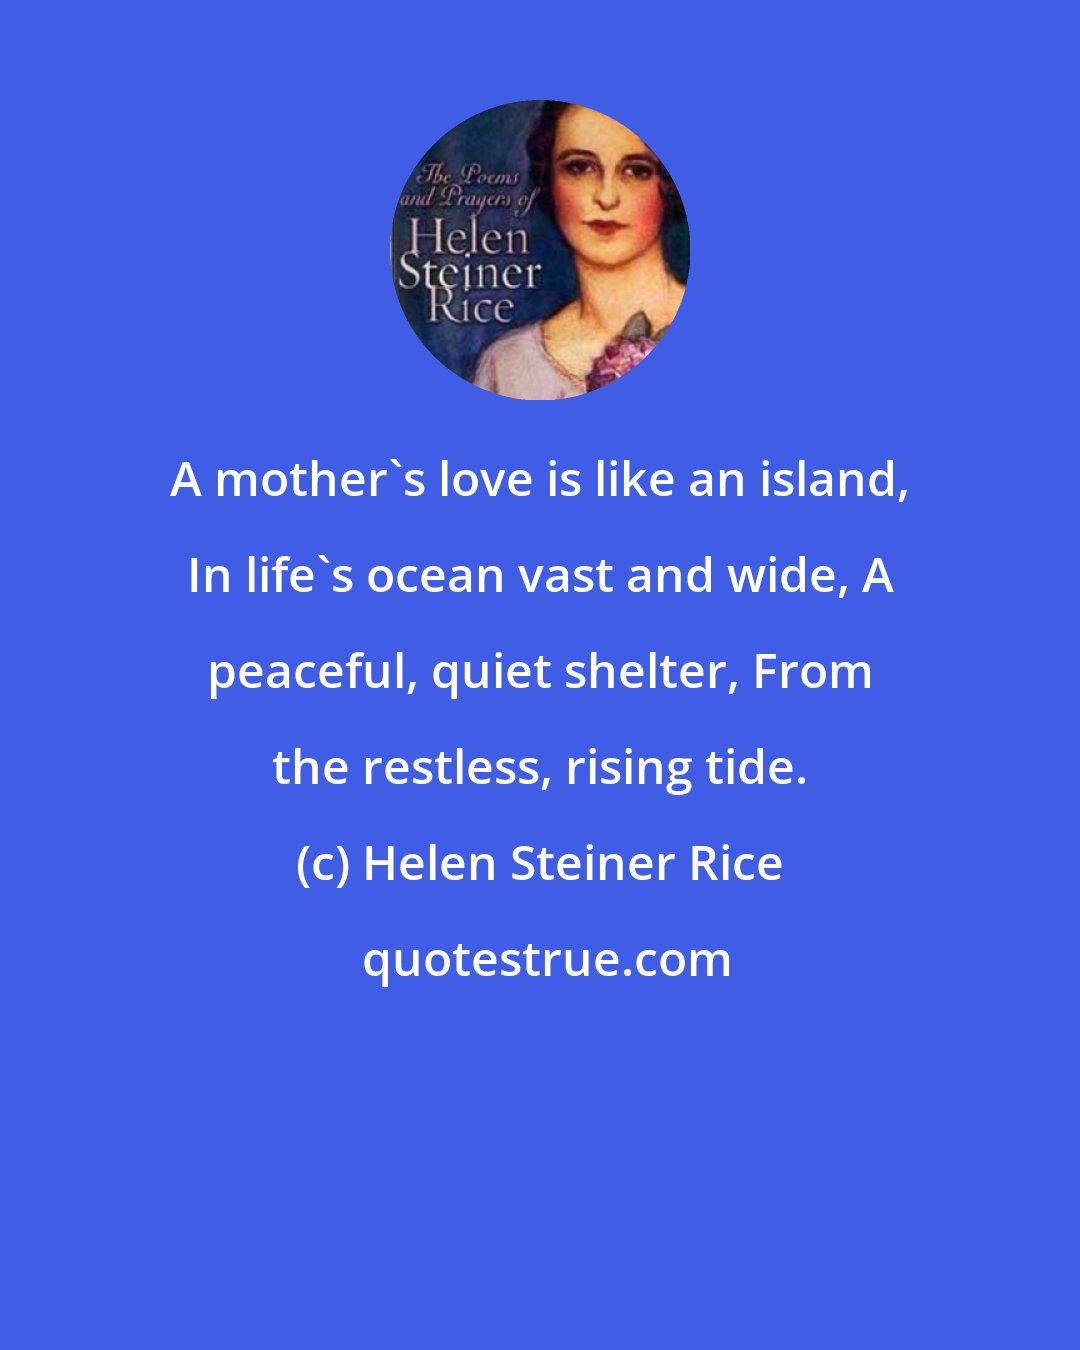 Helen Steiner Rice: A mother's love is like an island, In life's ocean vast and wide, A peaceful, quiet shelter, From the restless, rising tide.